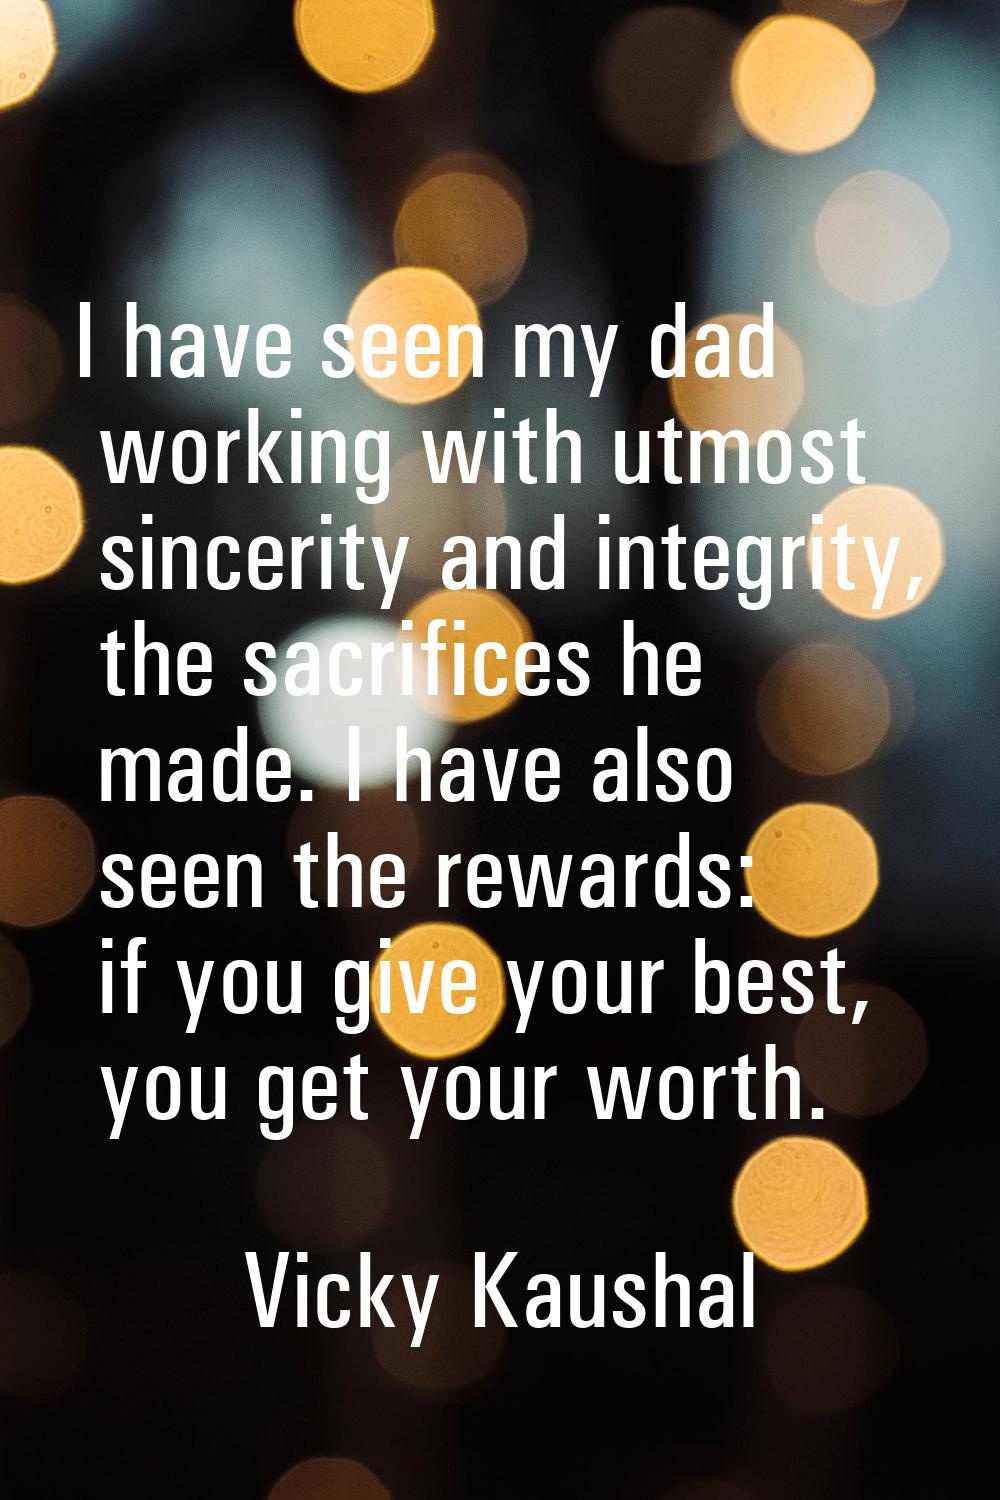 I have seen my dad working with utmost sincerity and integrity, the sacrifices he made. I have also